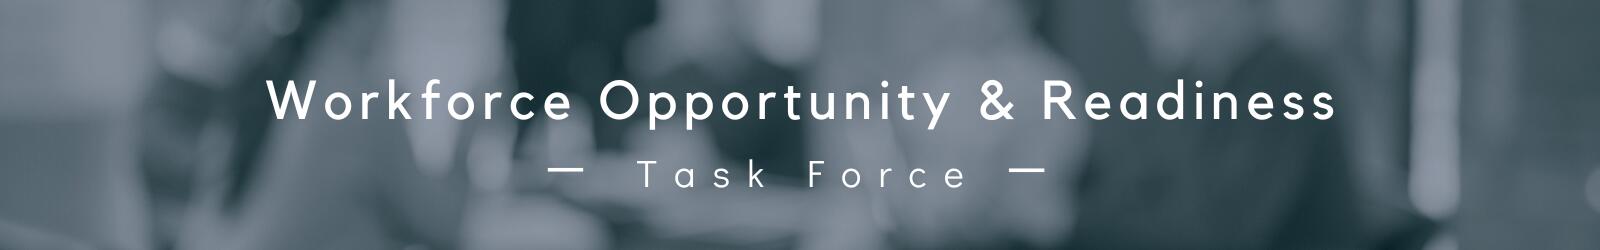 Workforce Opportunity and Readiness Task Force